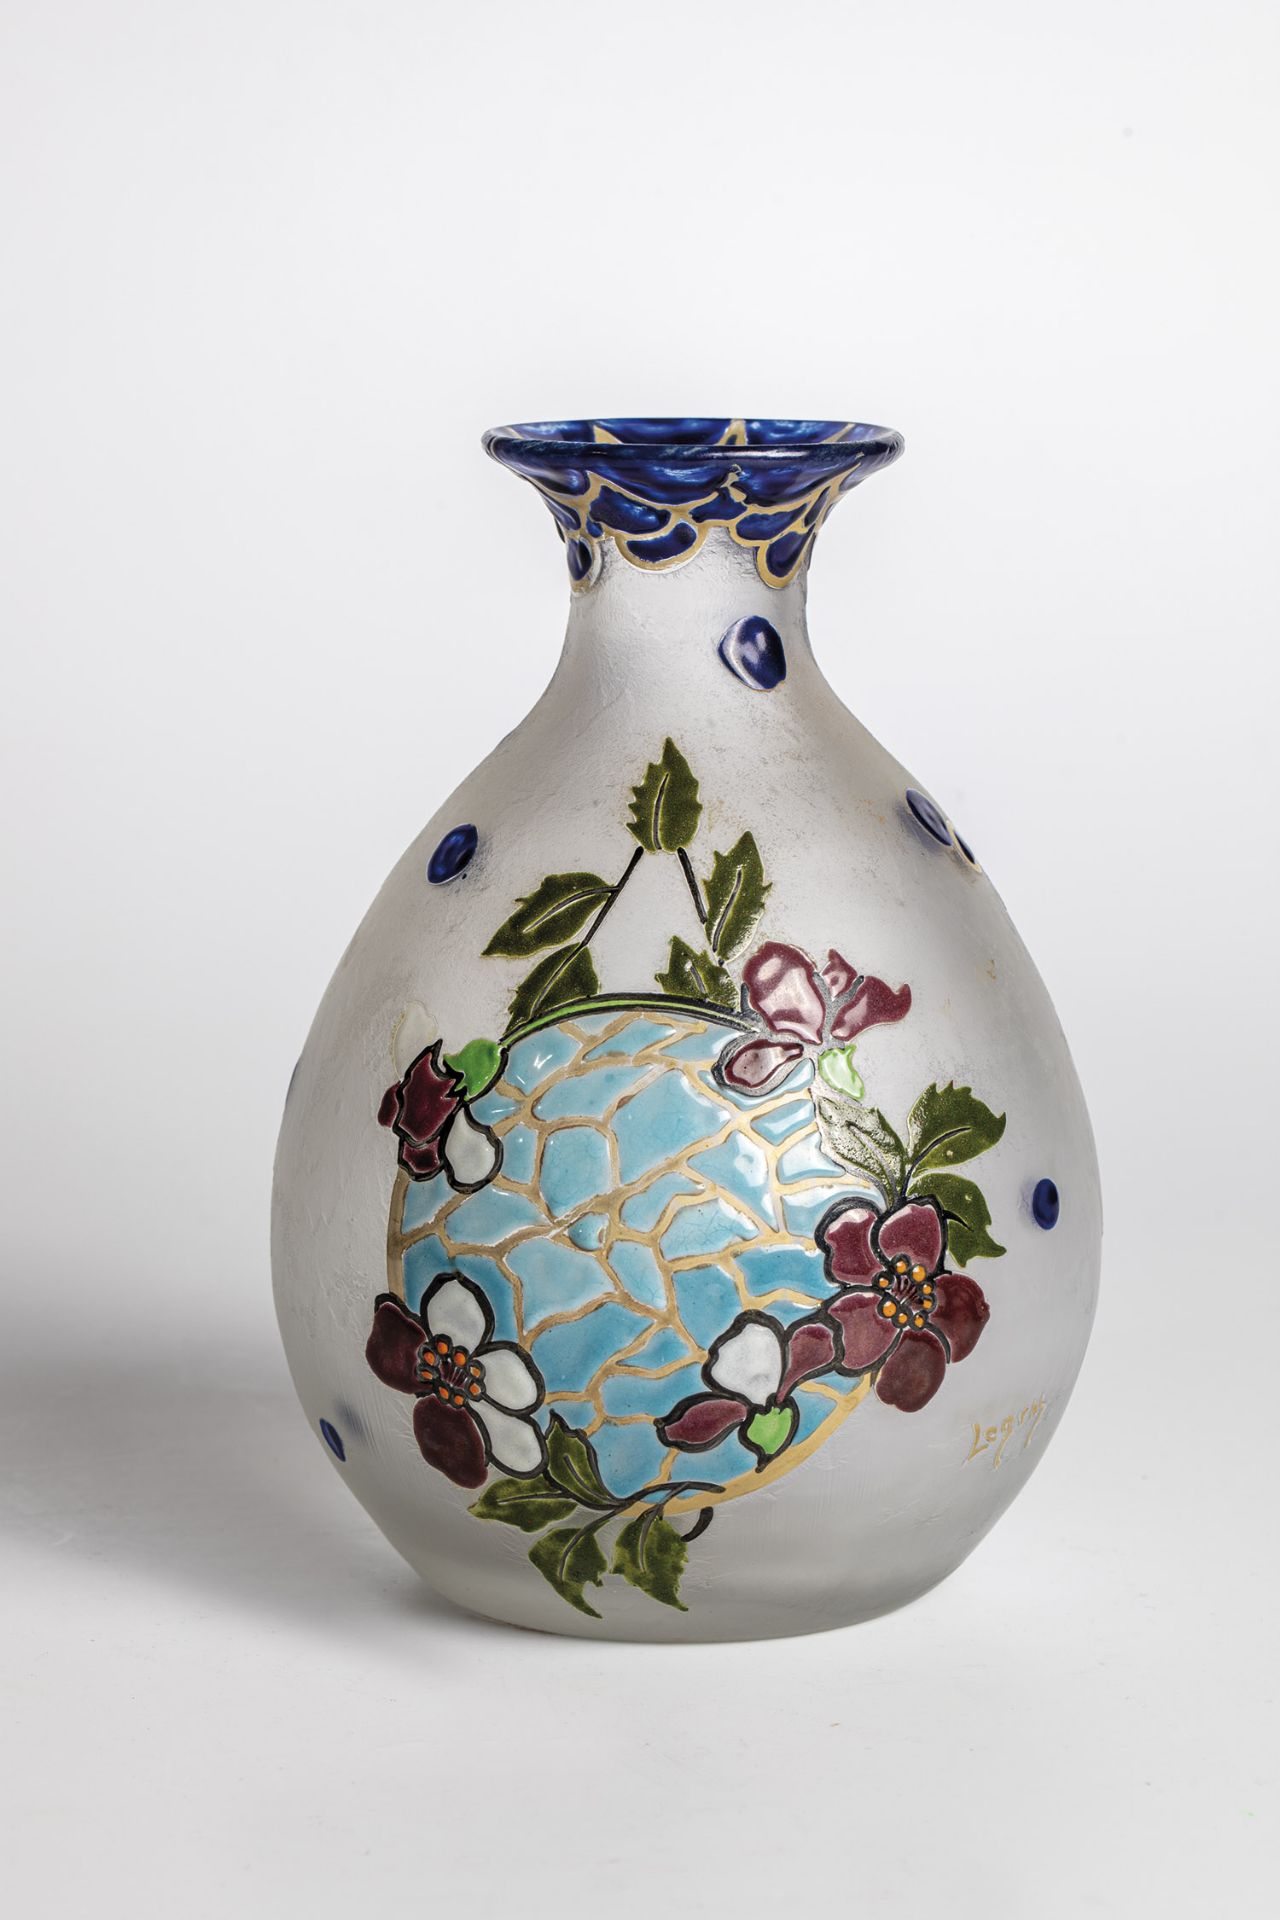 Vase Legras & Cie., Verreries de Saint-Denis, ca. 1925 Colorless glass. Etched and painted in